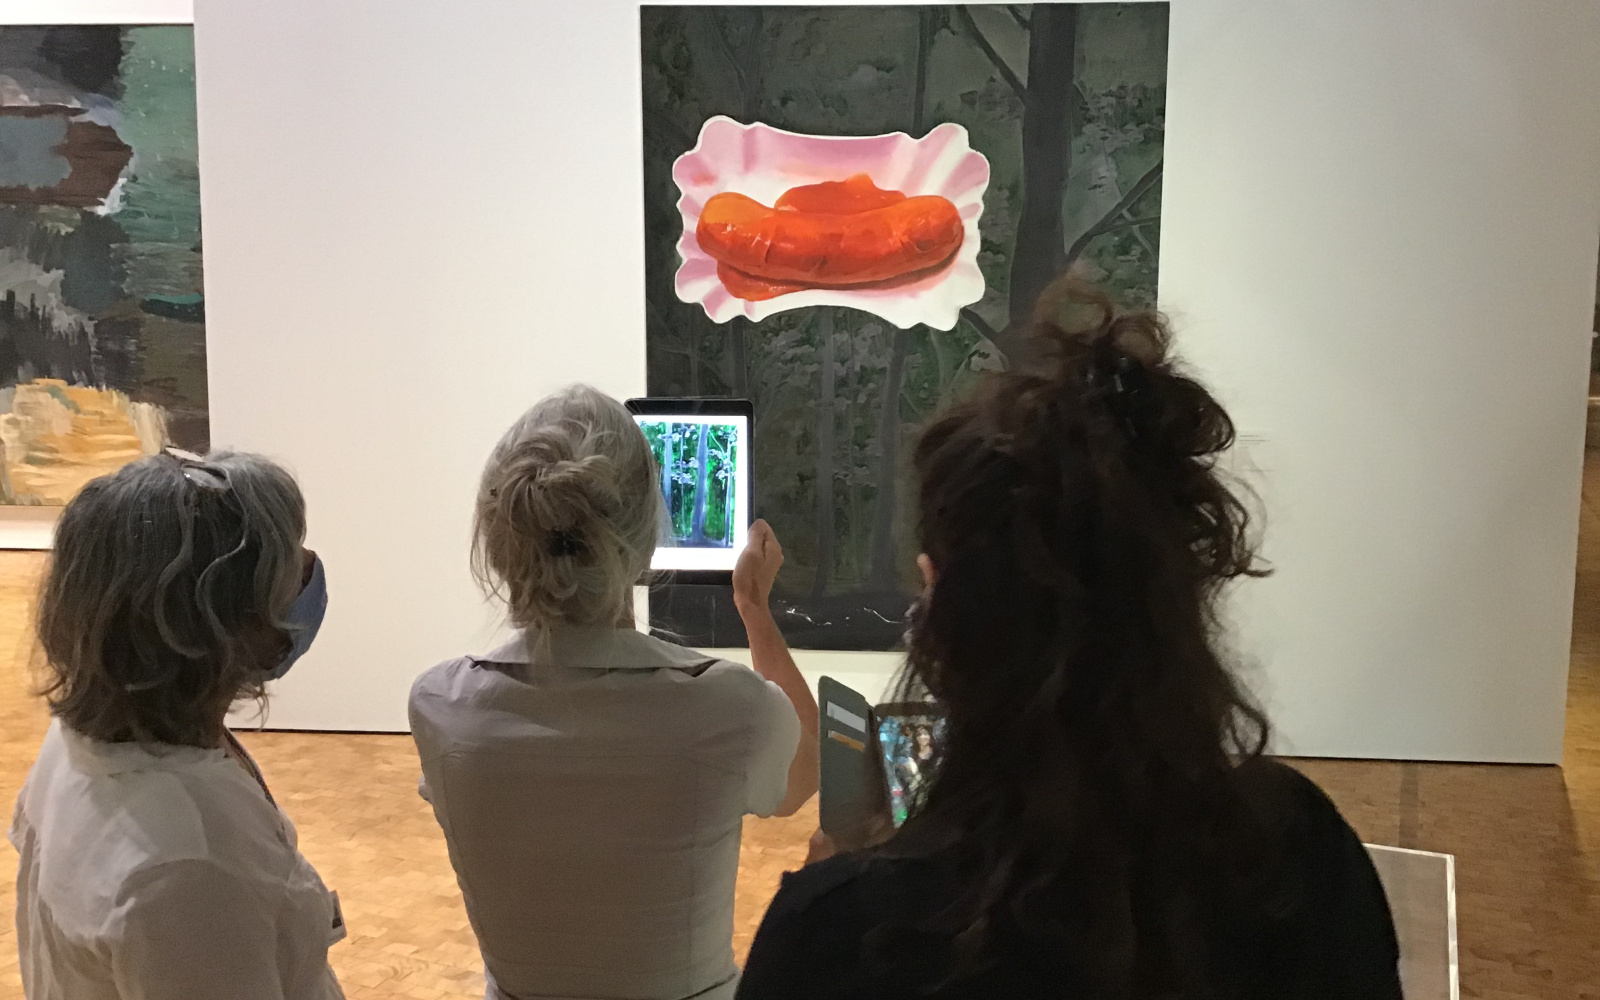 Three women stand in front of a picture showing a curry sausage in a cardboard bowl. One of the women holds an iPad on the picture.